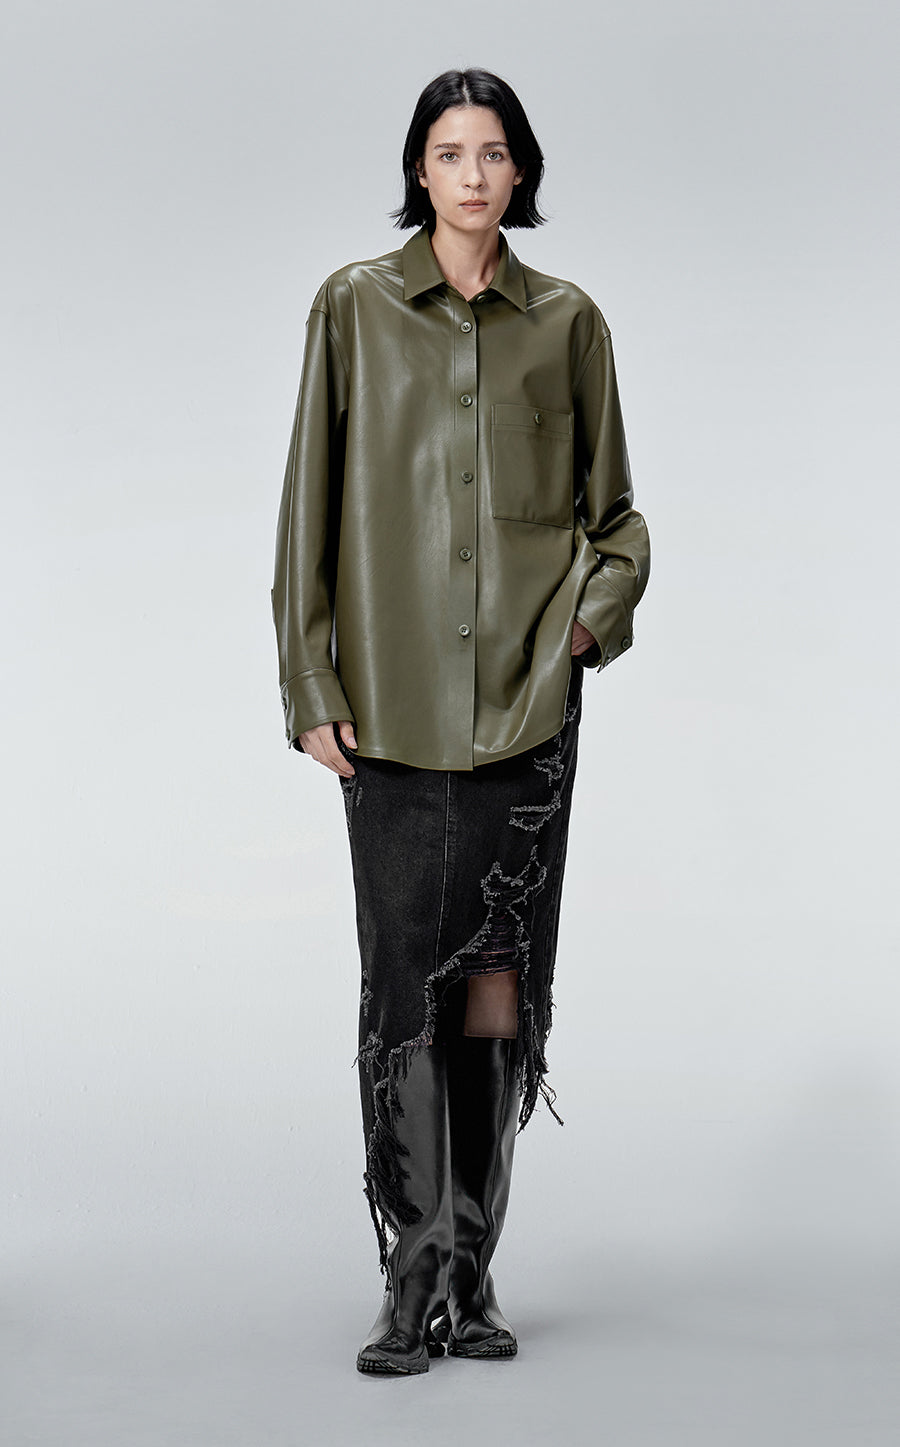 Coat / JNBY Faux Leather Coat in Shirt Style